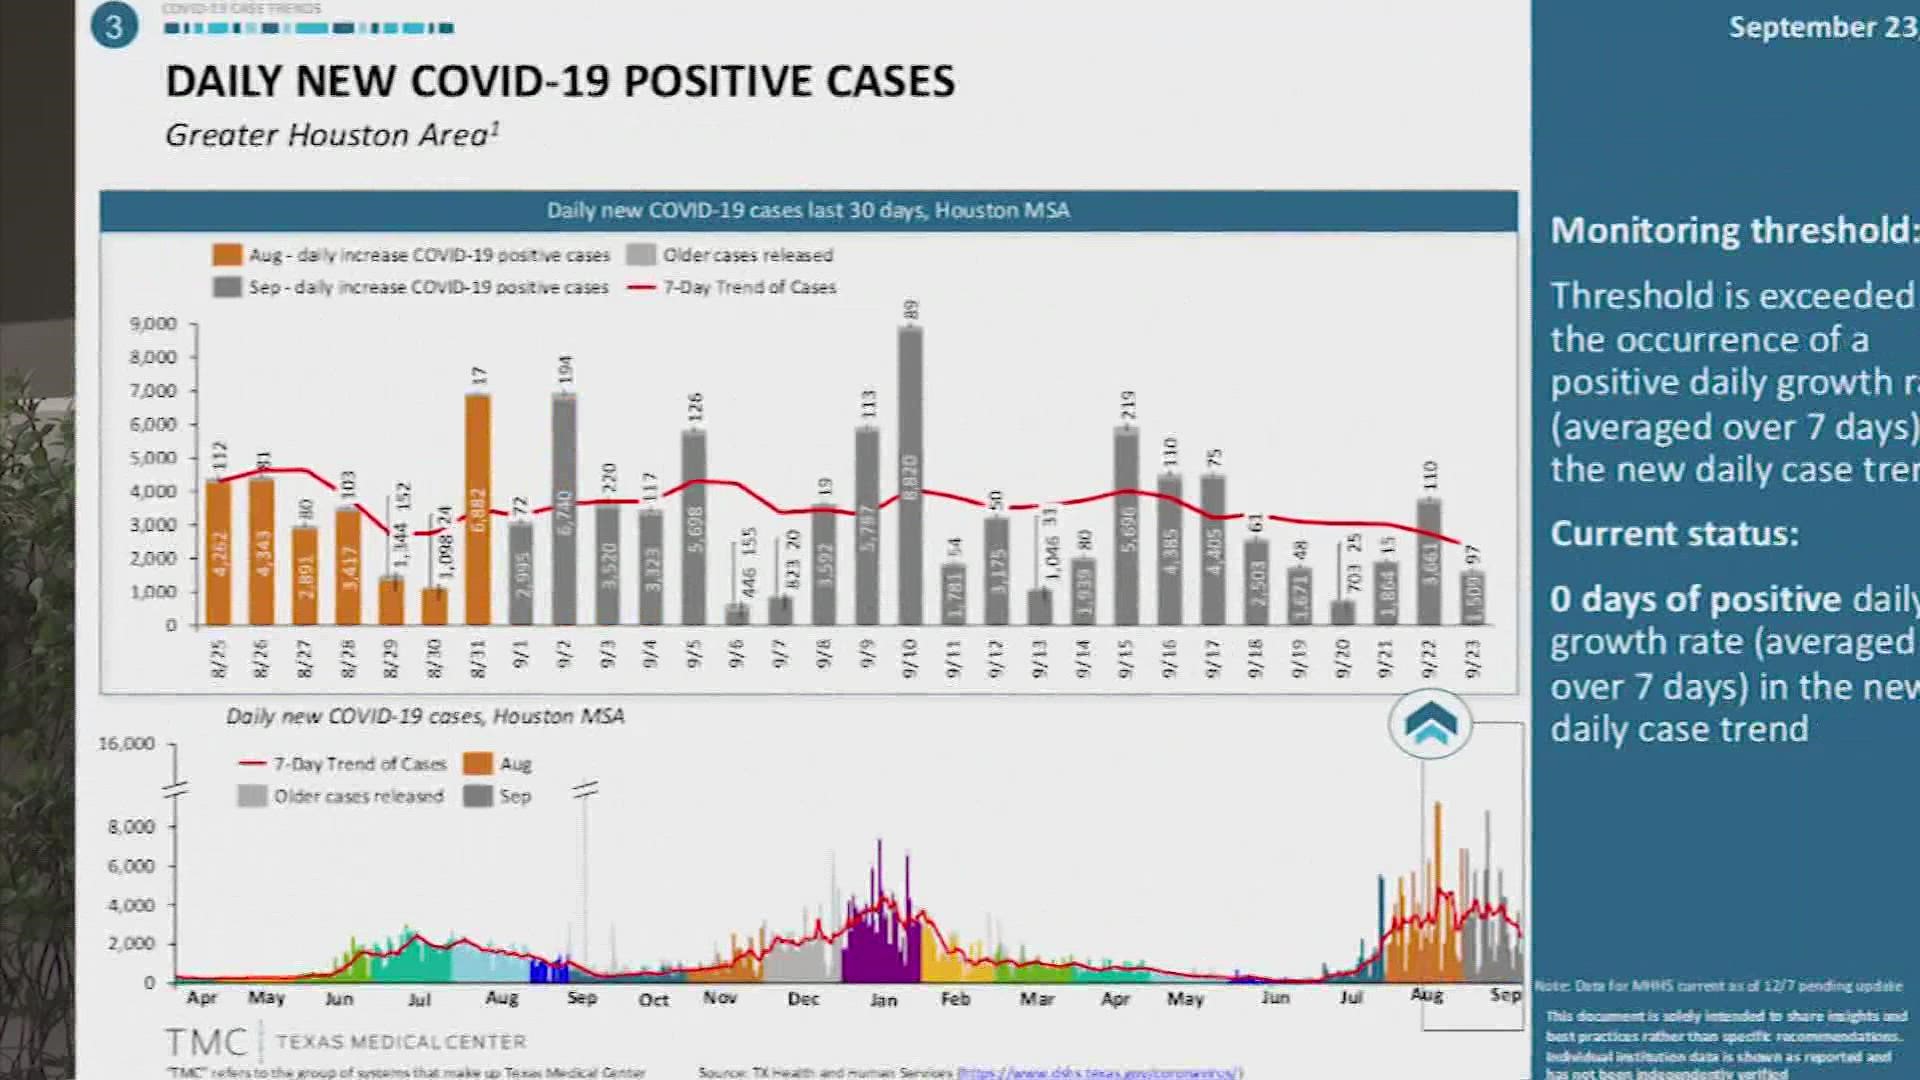 The Texas Medical Center’s COVID-19 dashboard is showing updates that appear promising.